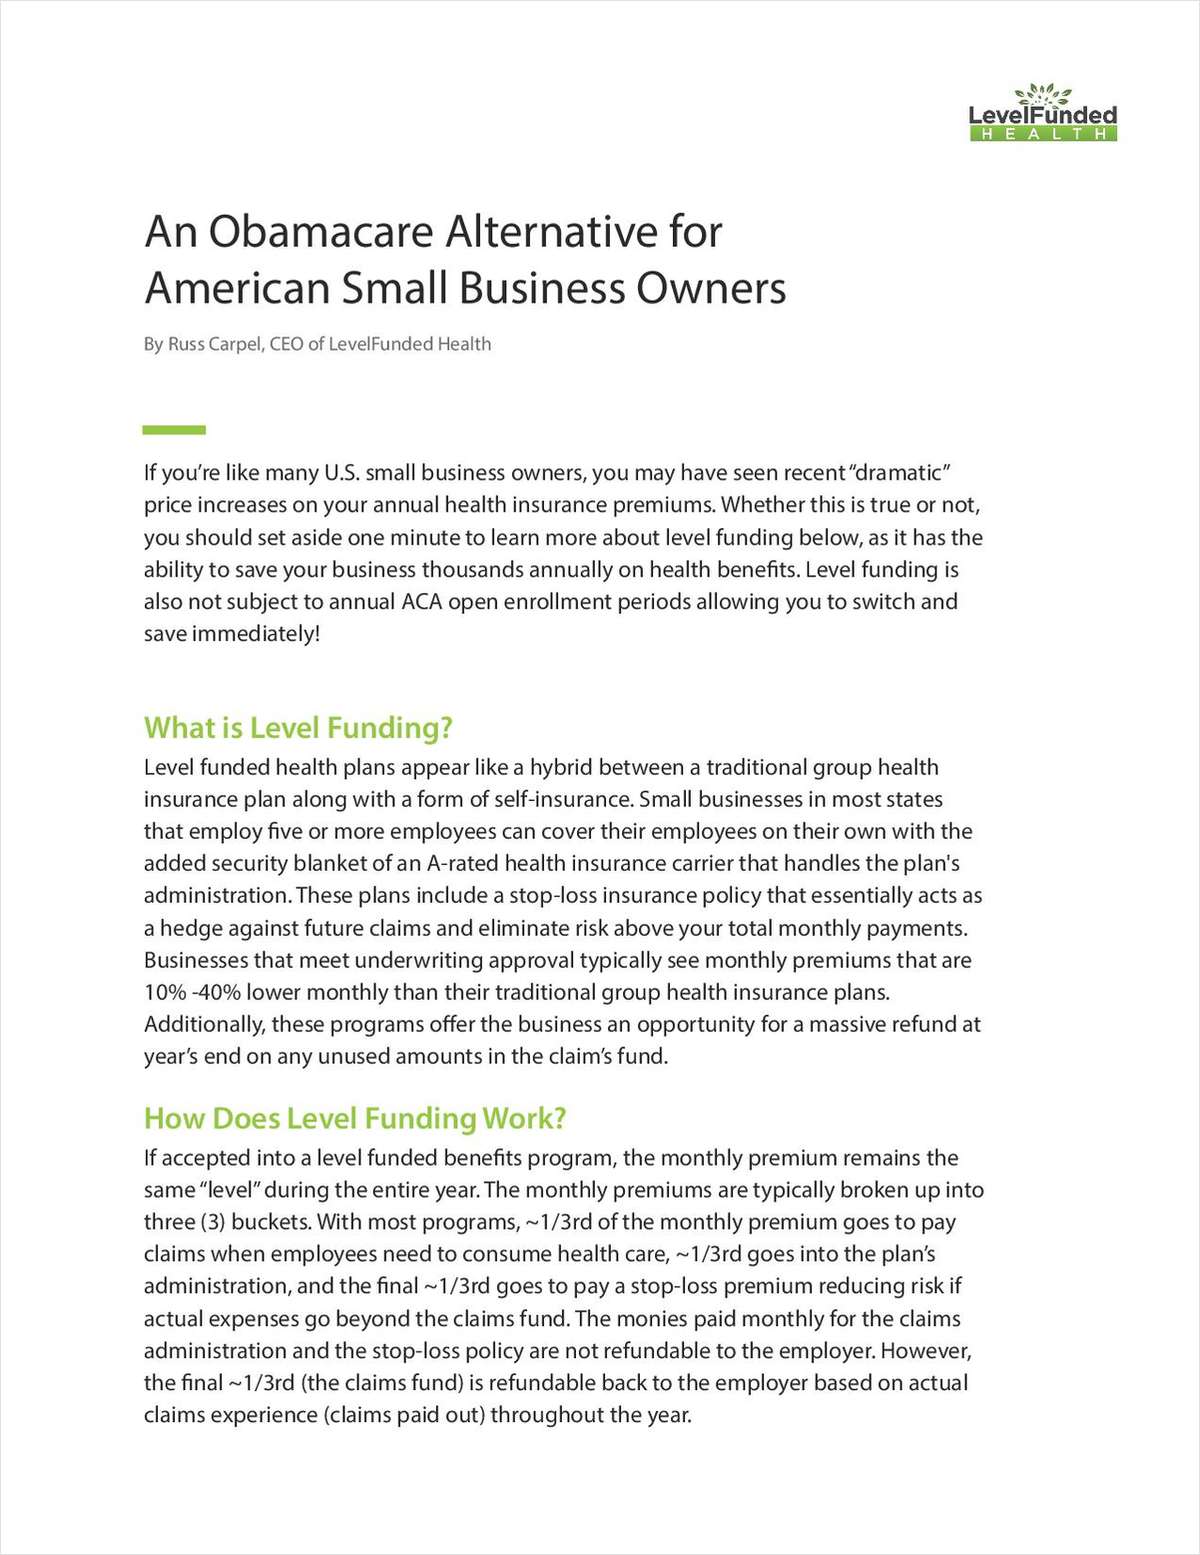 An Obamacare Alternative for Small Business Owners